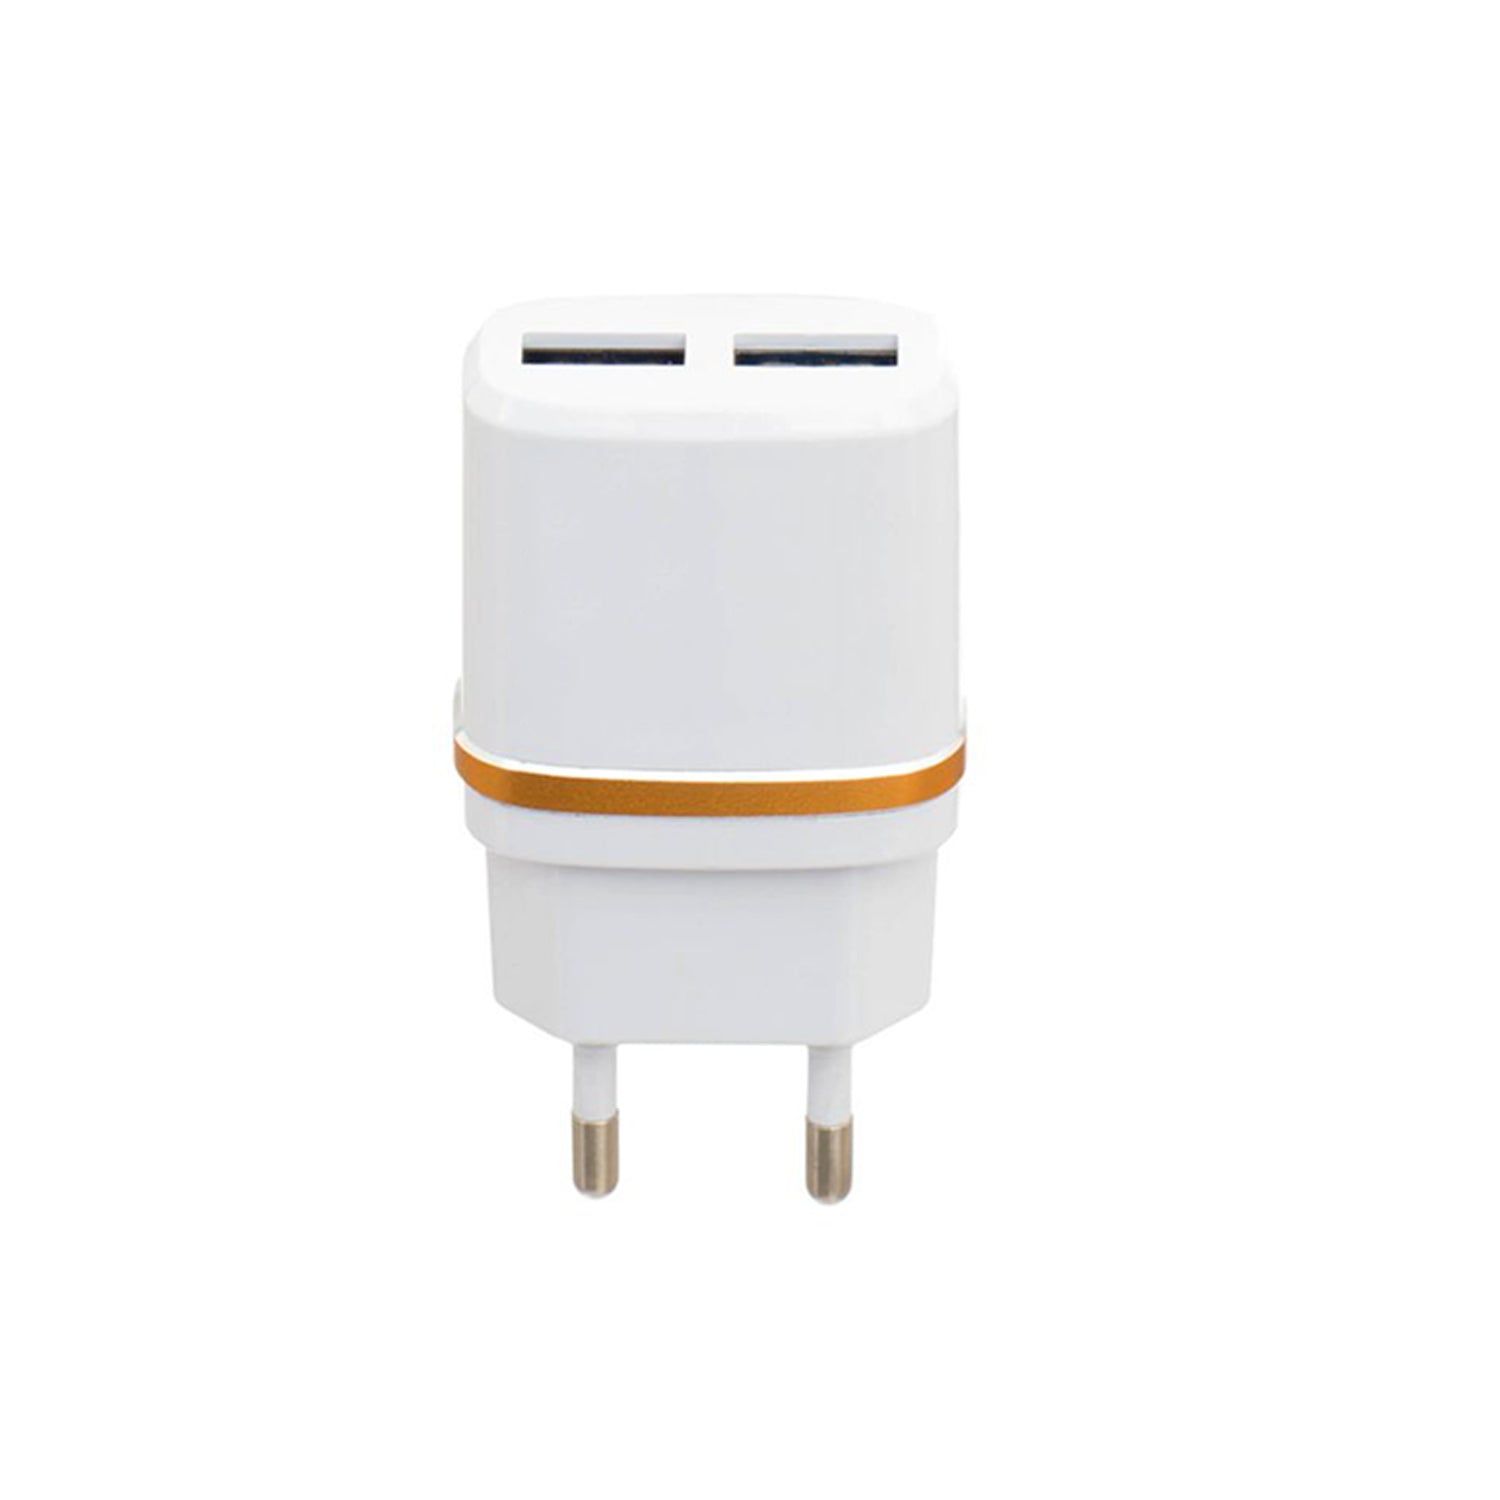 6103 USB Fast Charger Adapter (Adapter Only) 